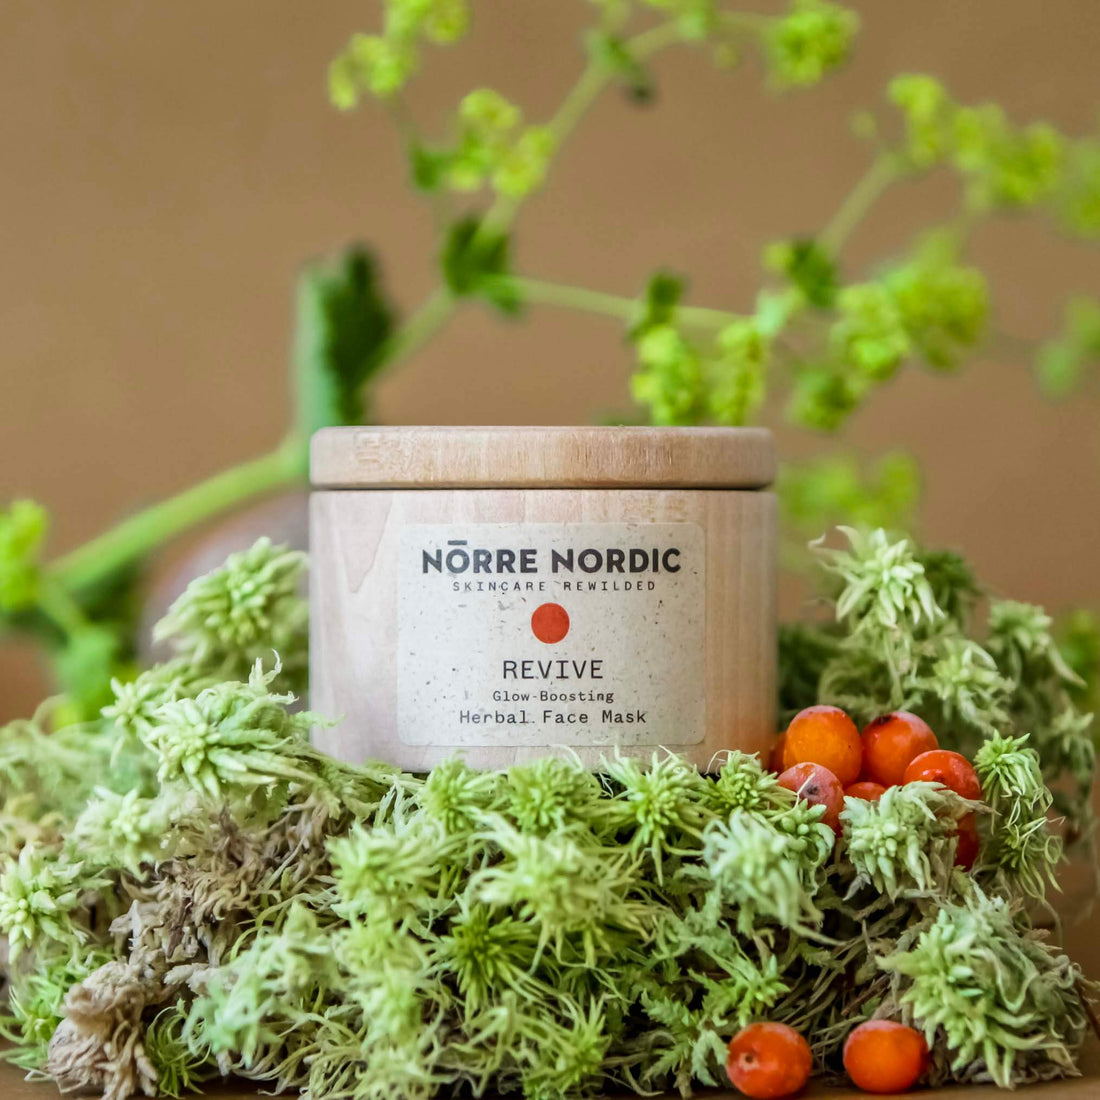 REVIVE Herbal Face Mask